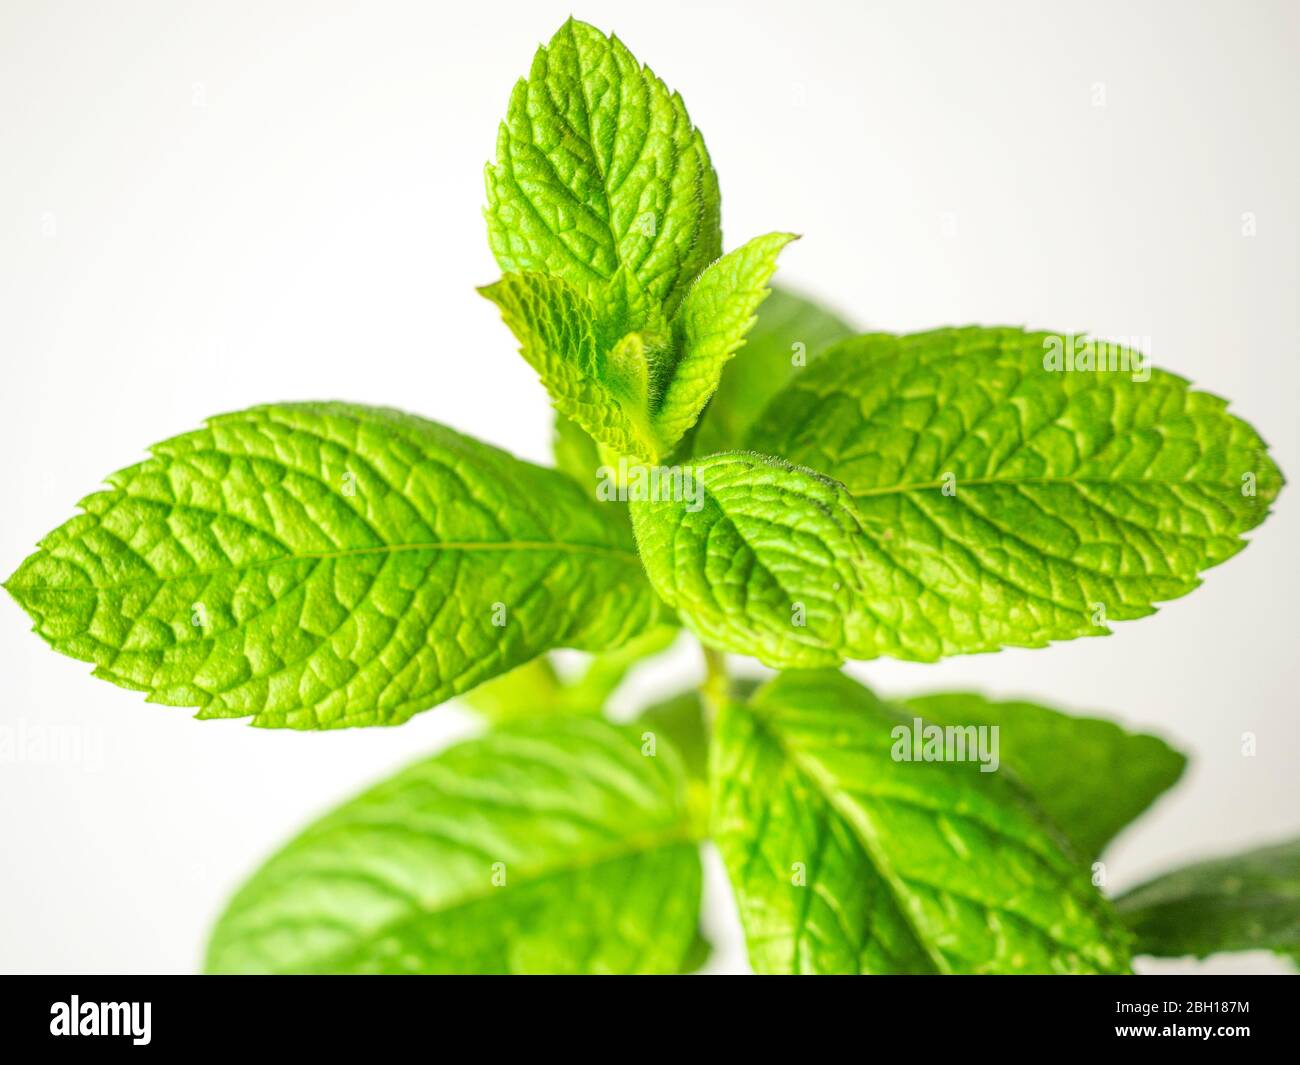 Spearmint leaves against a white background Stock Photo